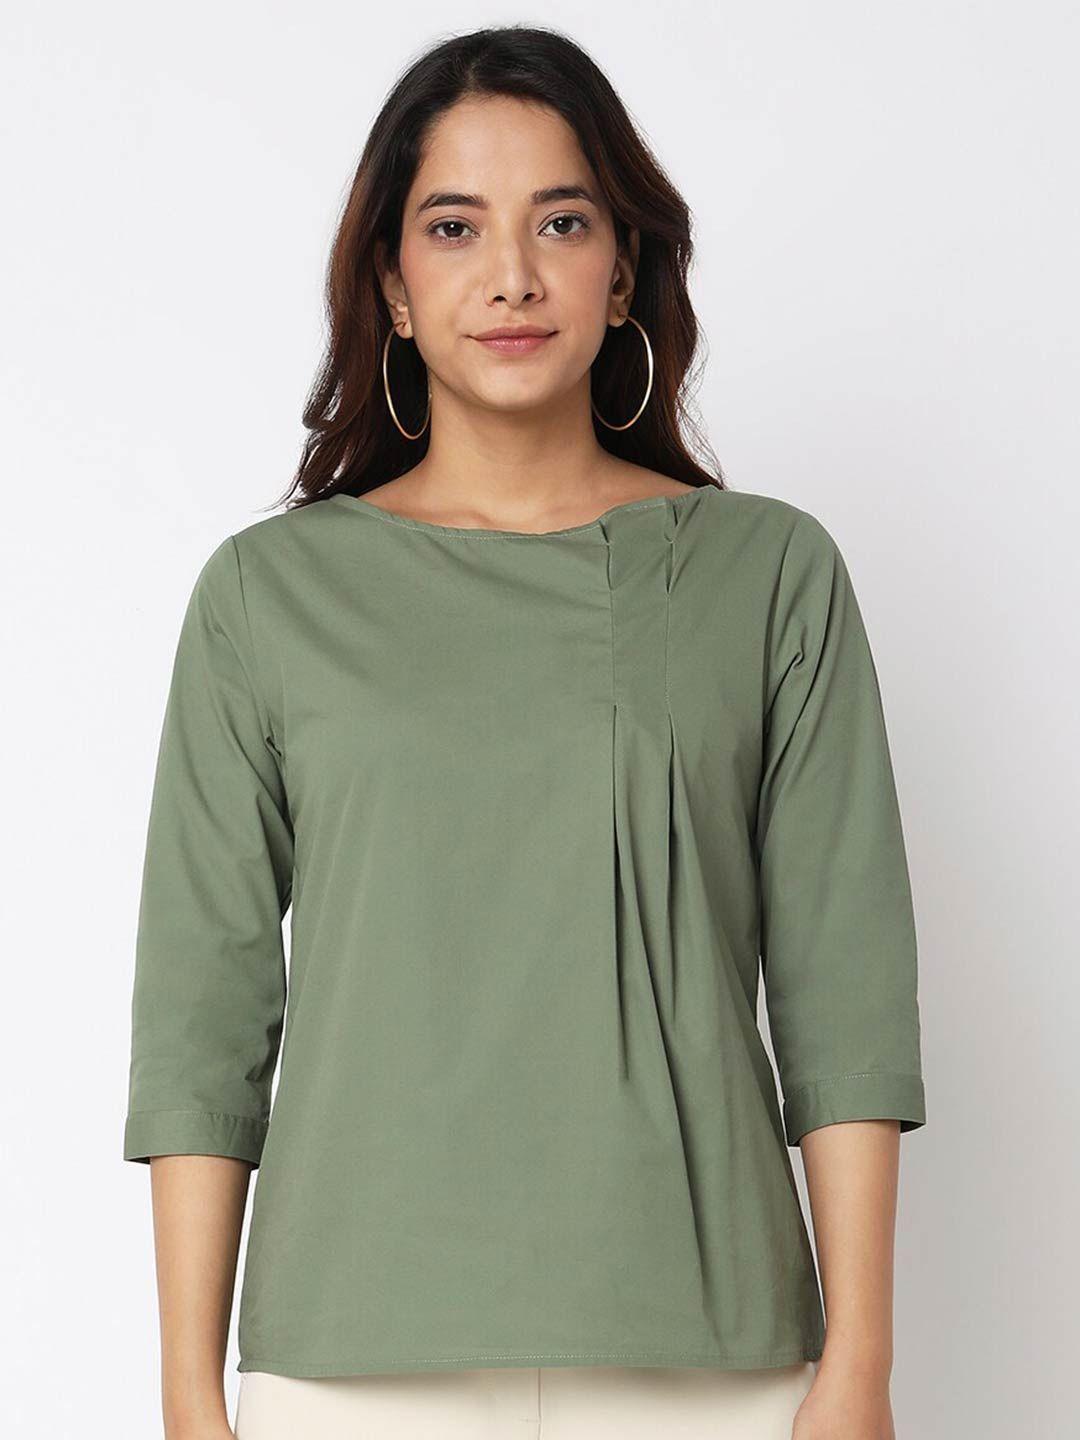 not-so-pink-olive-green-cotton-top